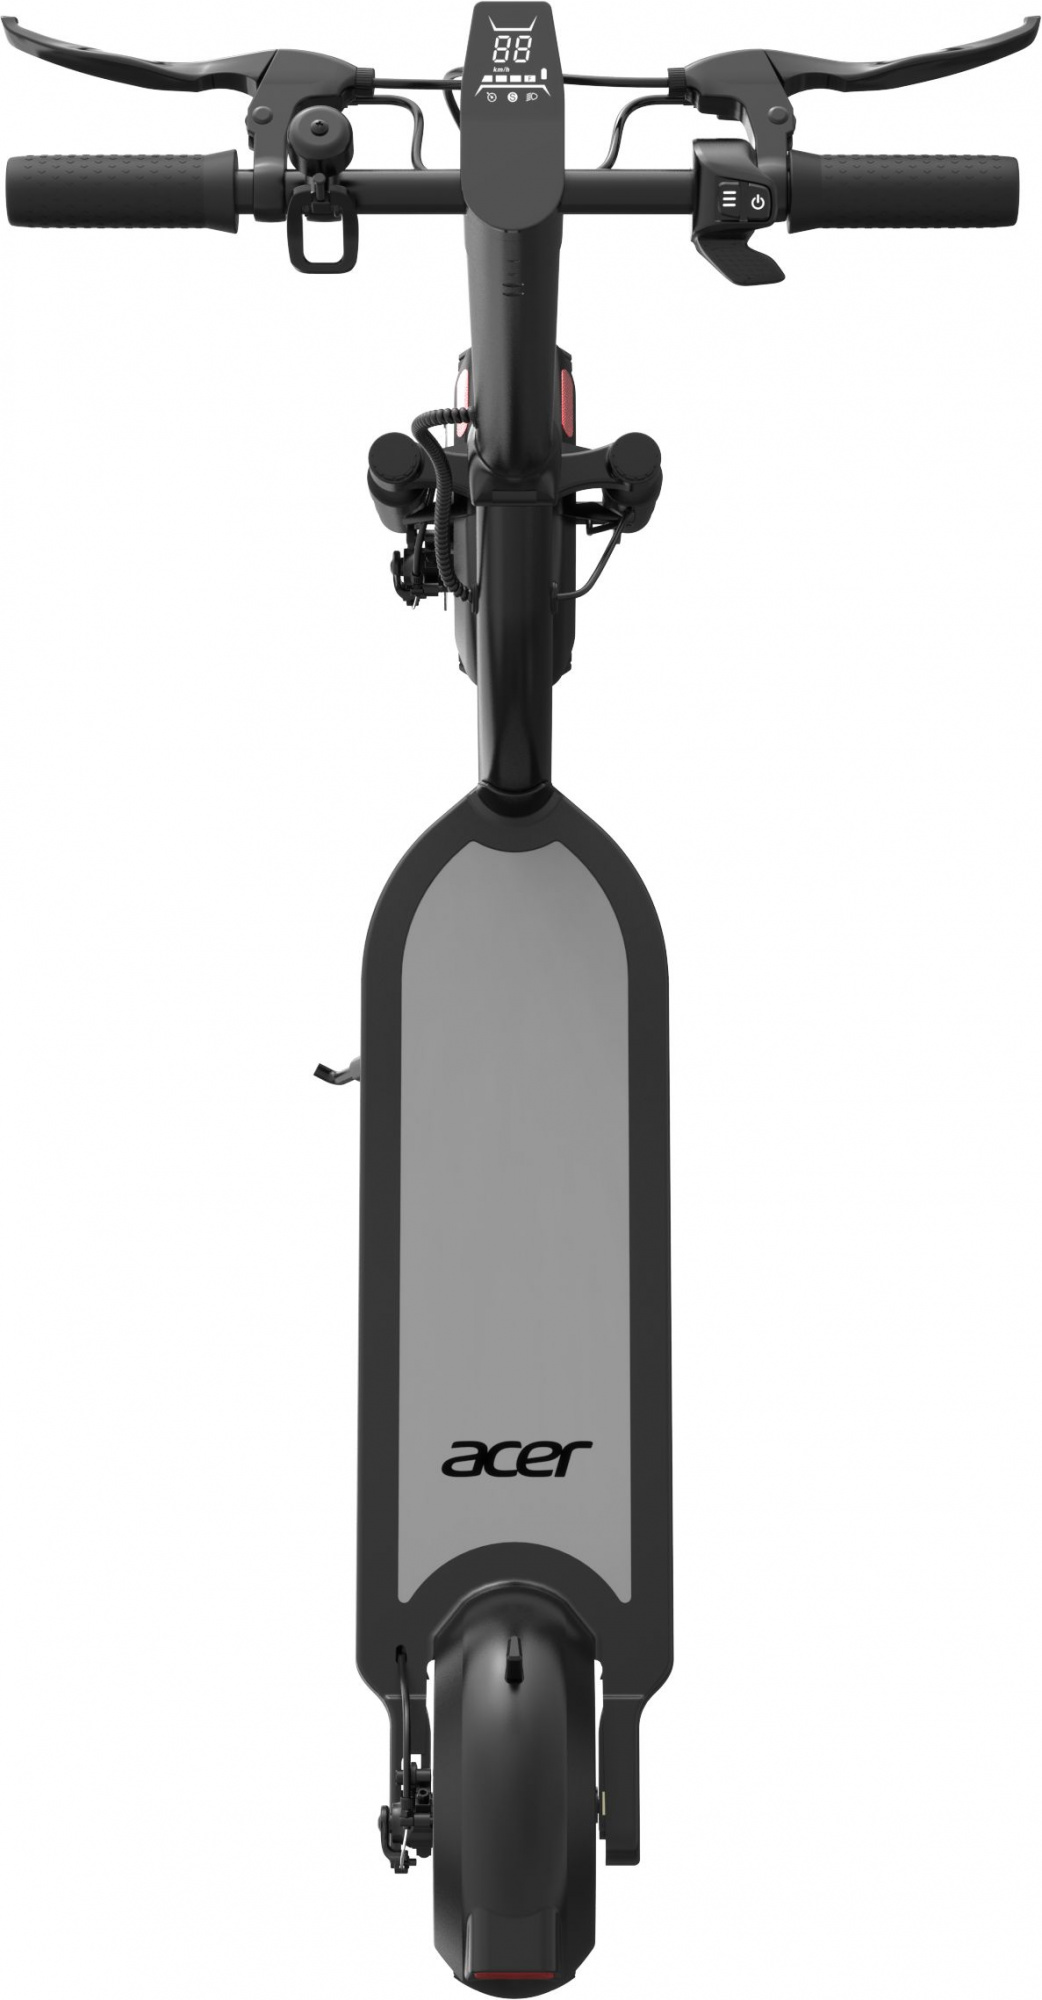 Acer electric scooter series 5. Acer es Series 5 самокат. Aes001 Acer электросамокат. Узел складывание электросамокат Acer es Series 5 Max aes205 15000mah черный. Электросамокат Acer es Series 3 Max aes203 10000mah черный (без сумки).